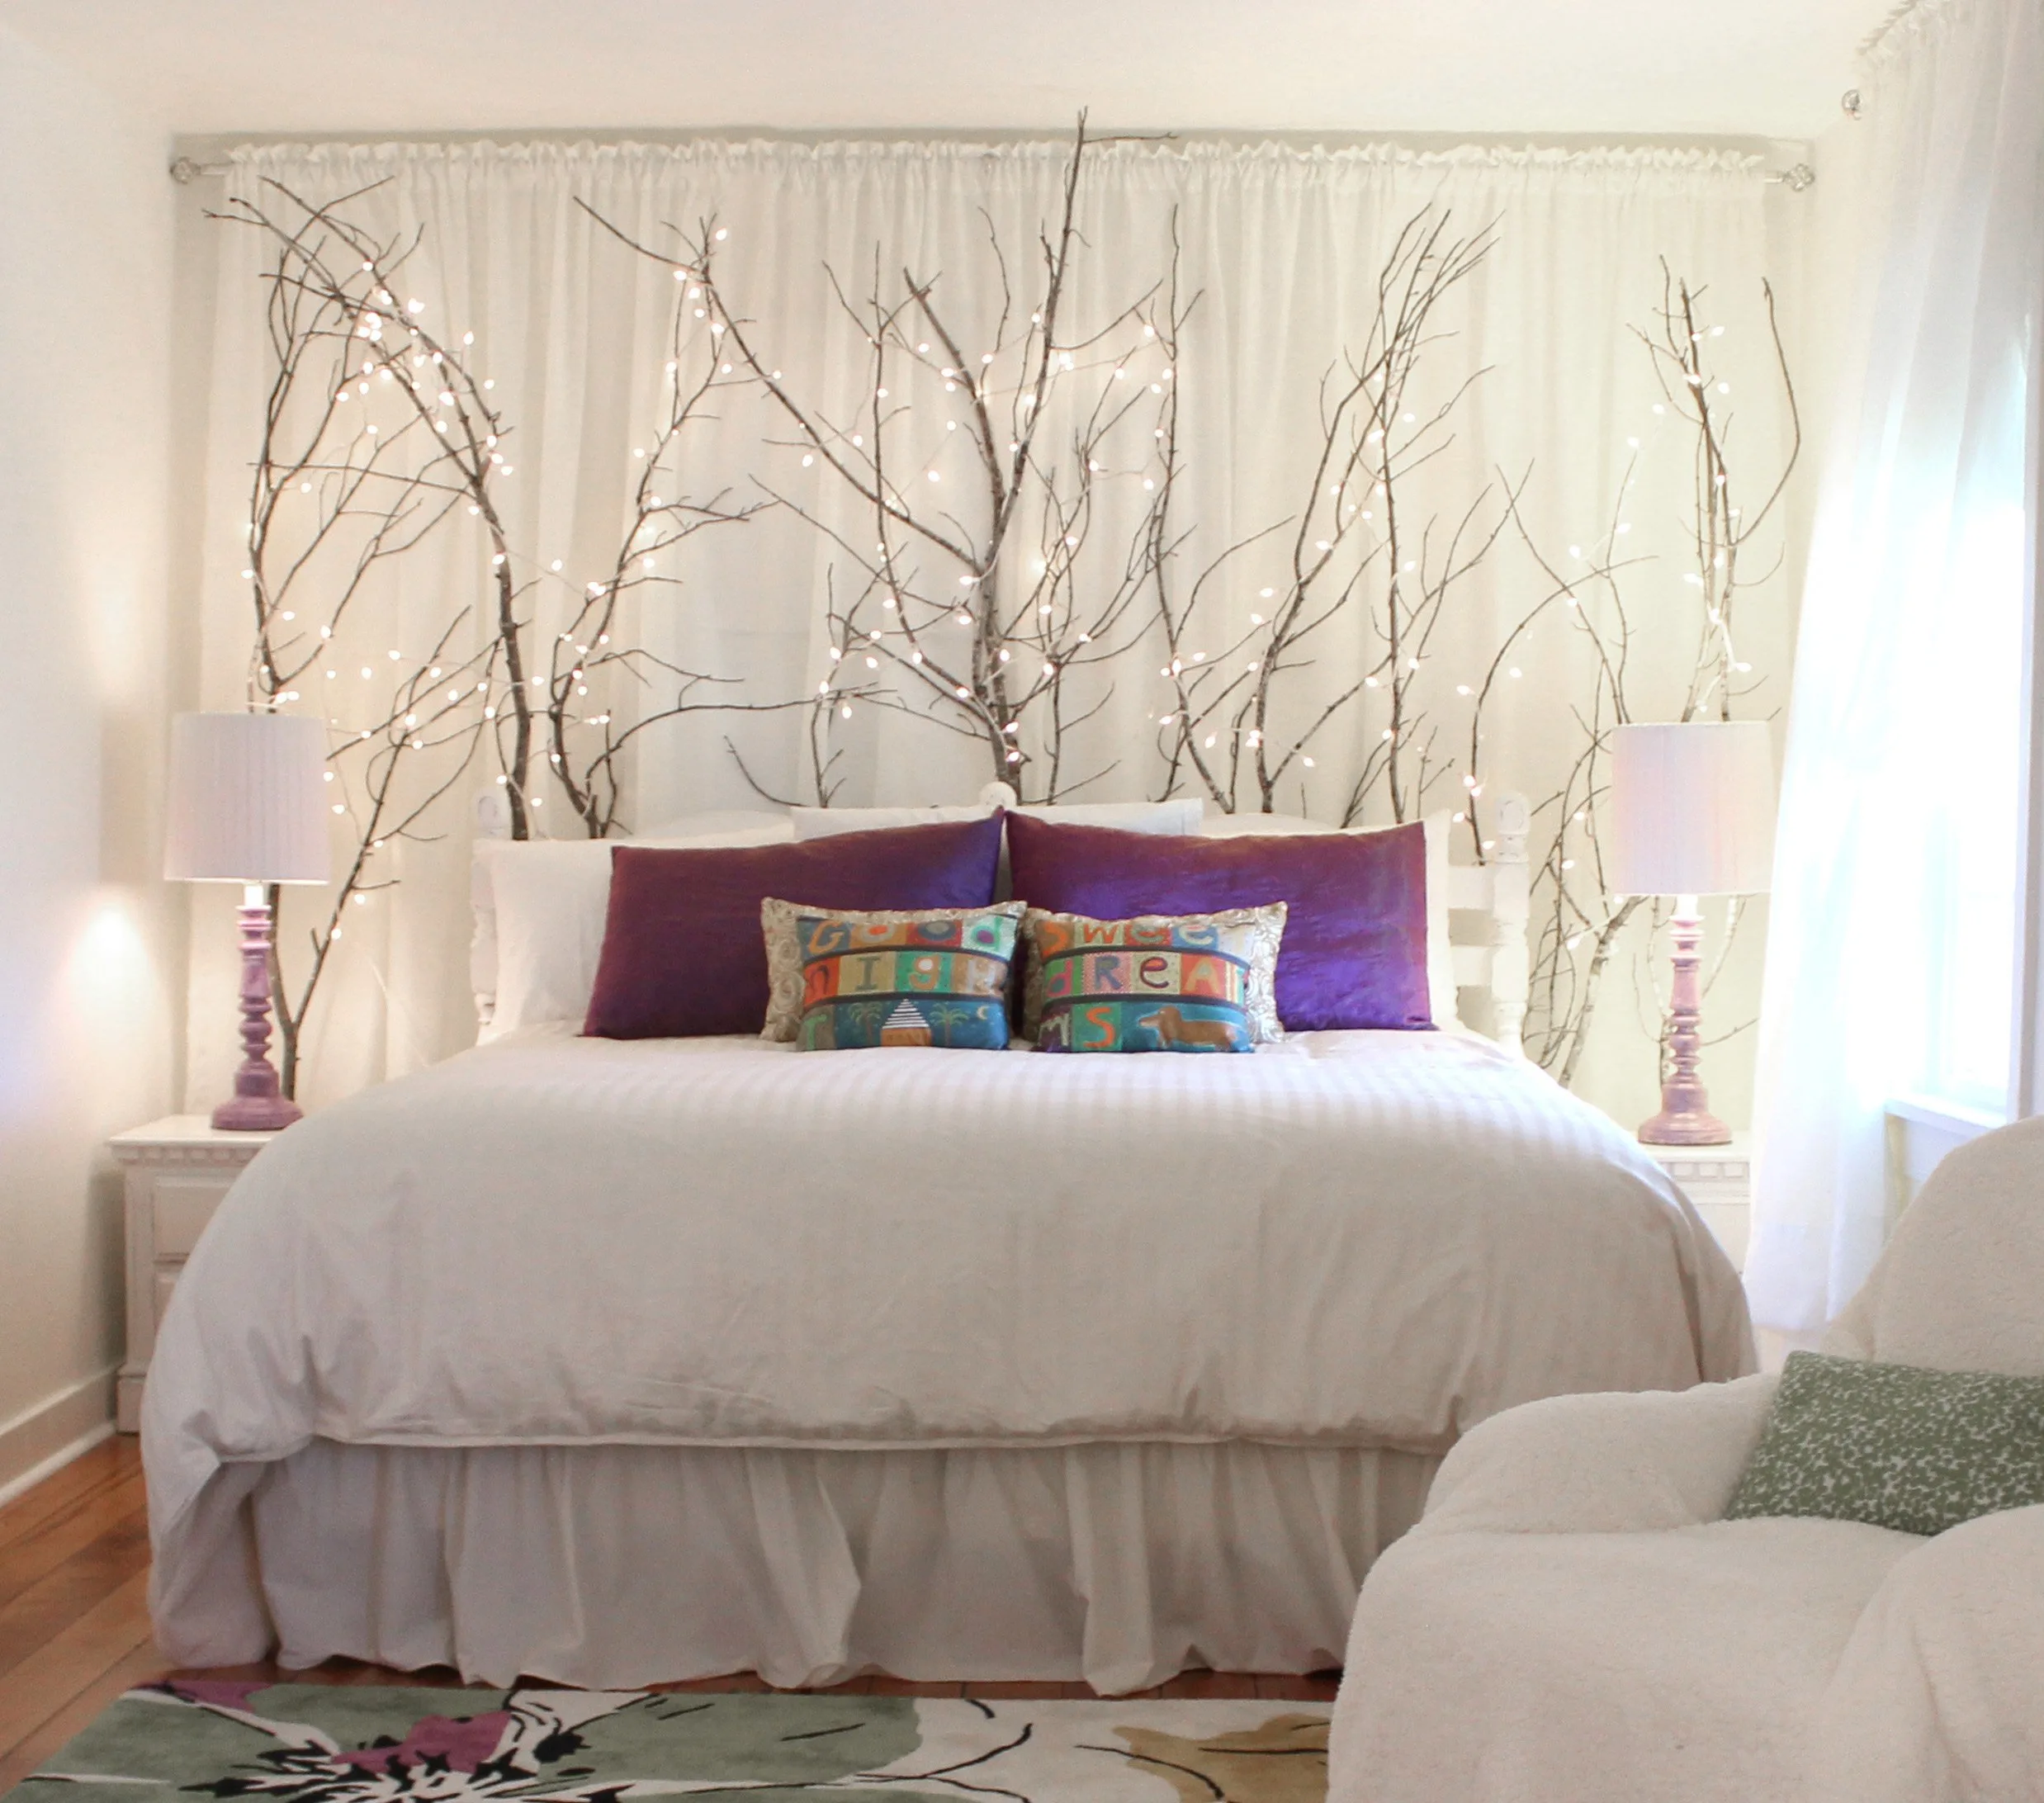 a bed with tree branches decorating the wall behind it and forming a headboard